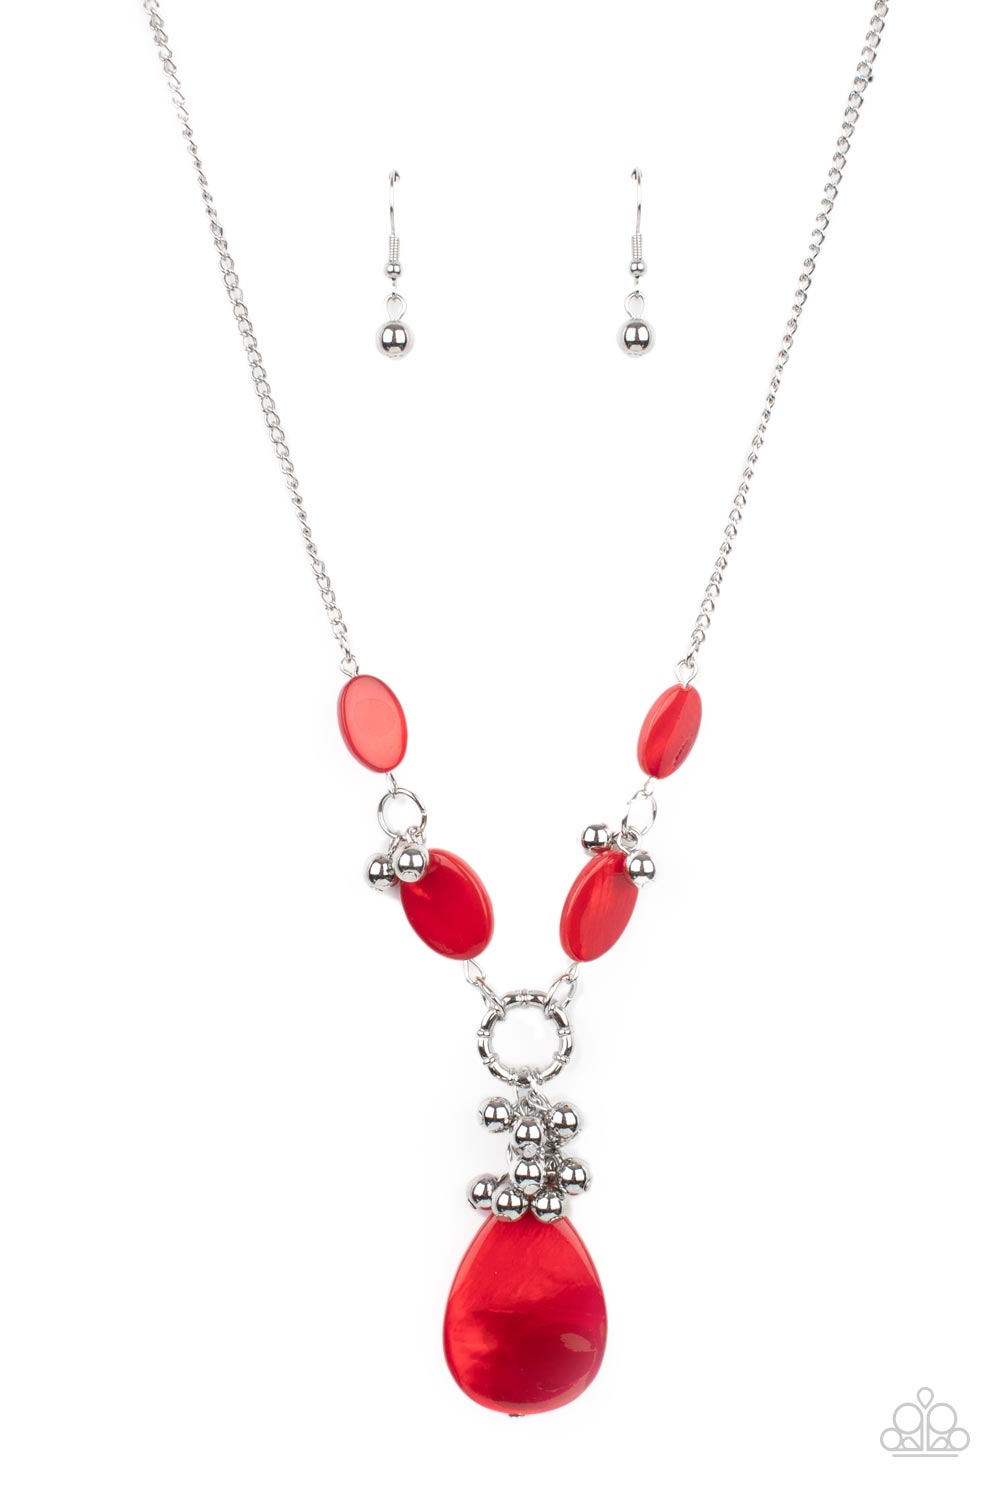 Paparazzi Summer Idol - Red Necklace